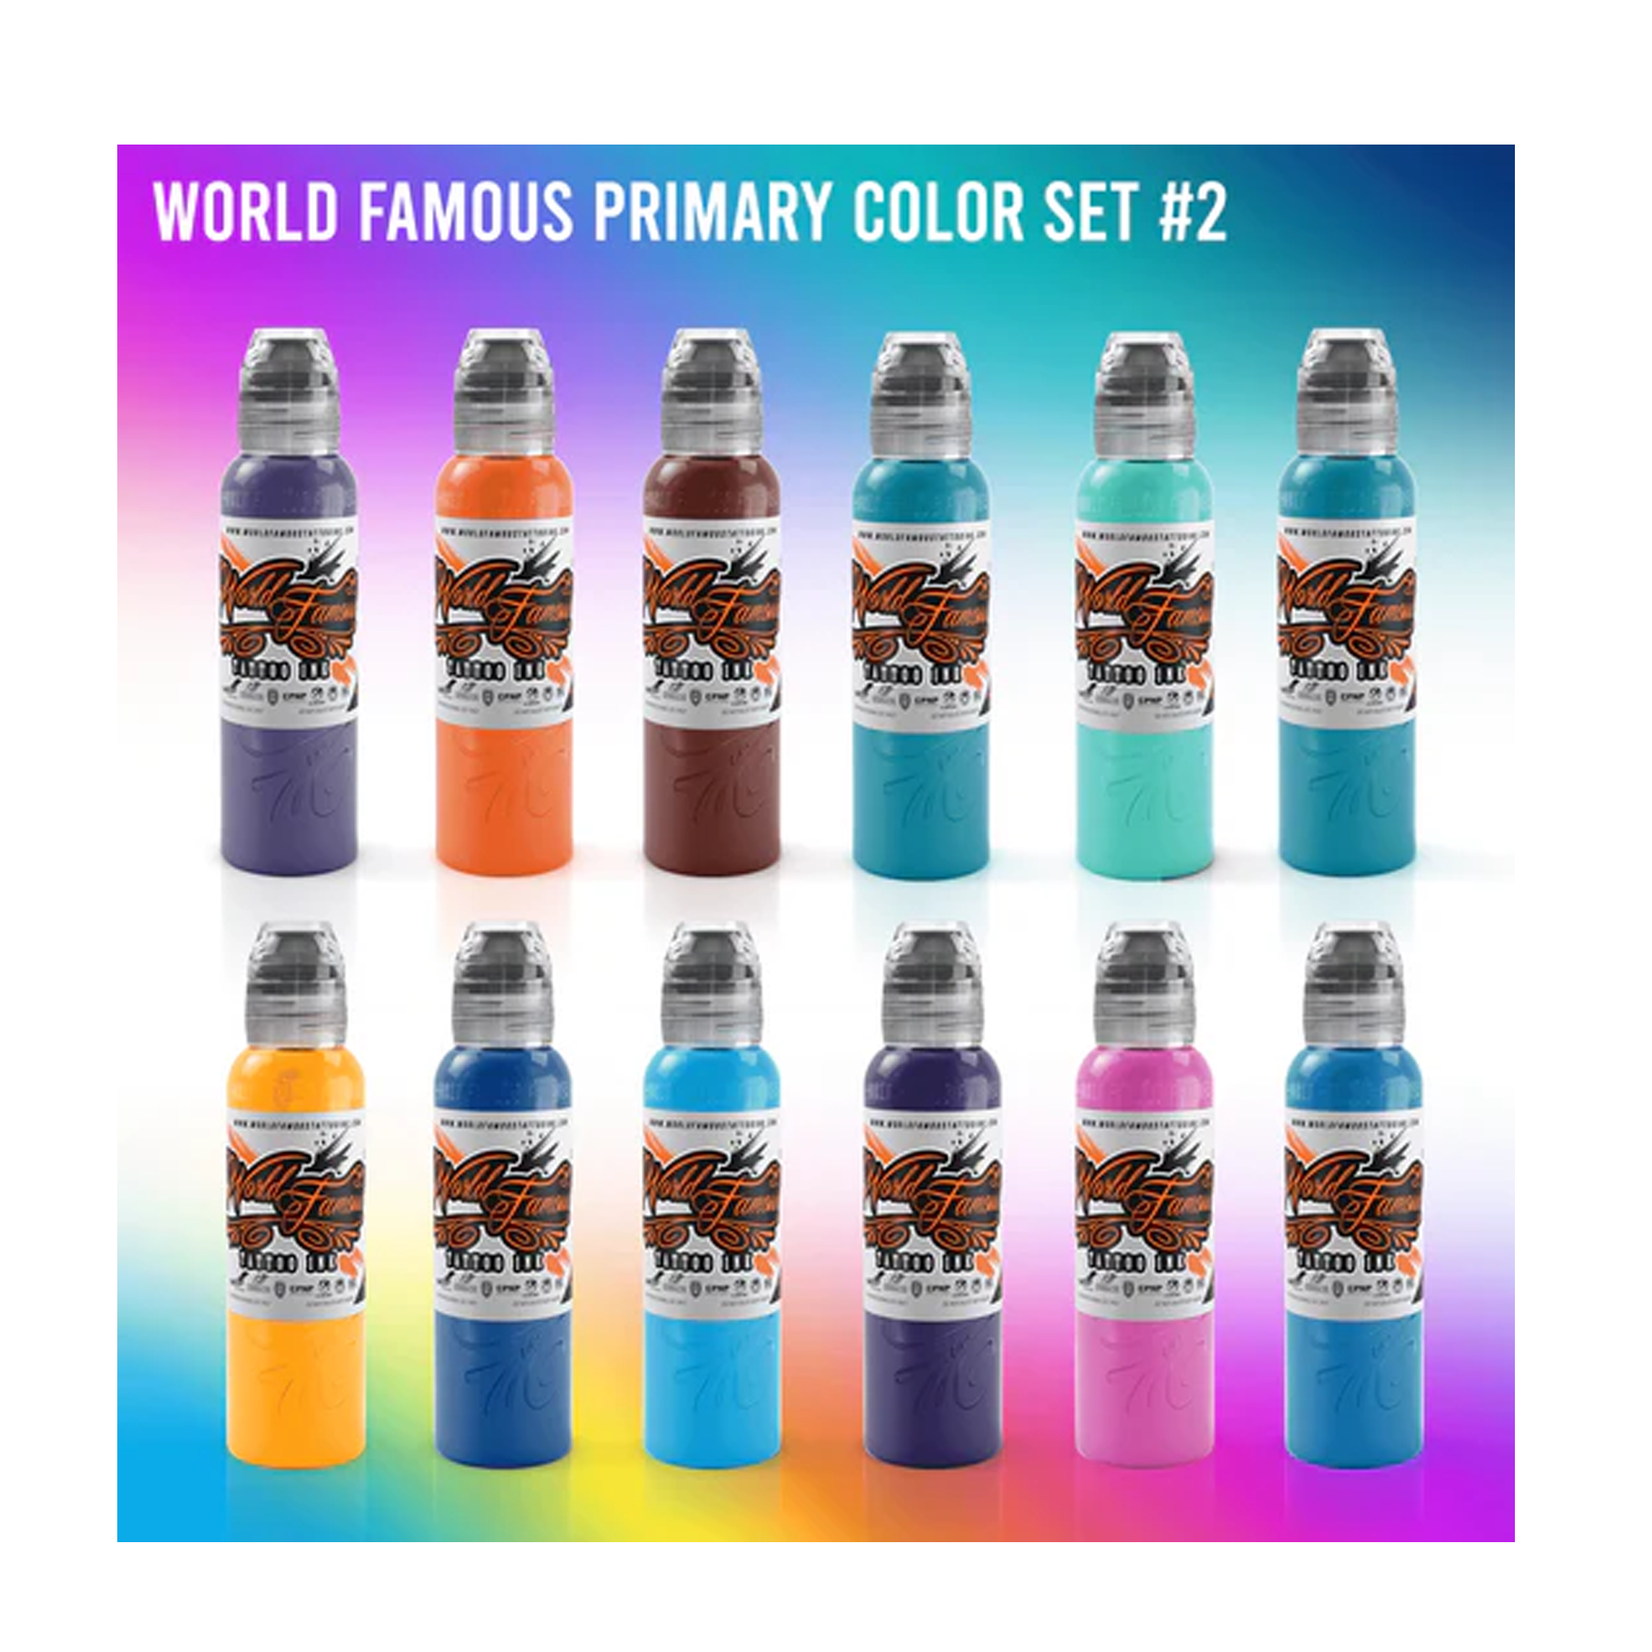 WORLD FAMOUS PRIMARY COLOR INK SET #2